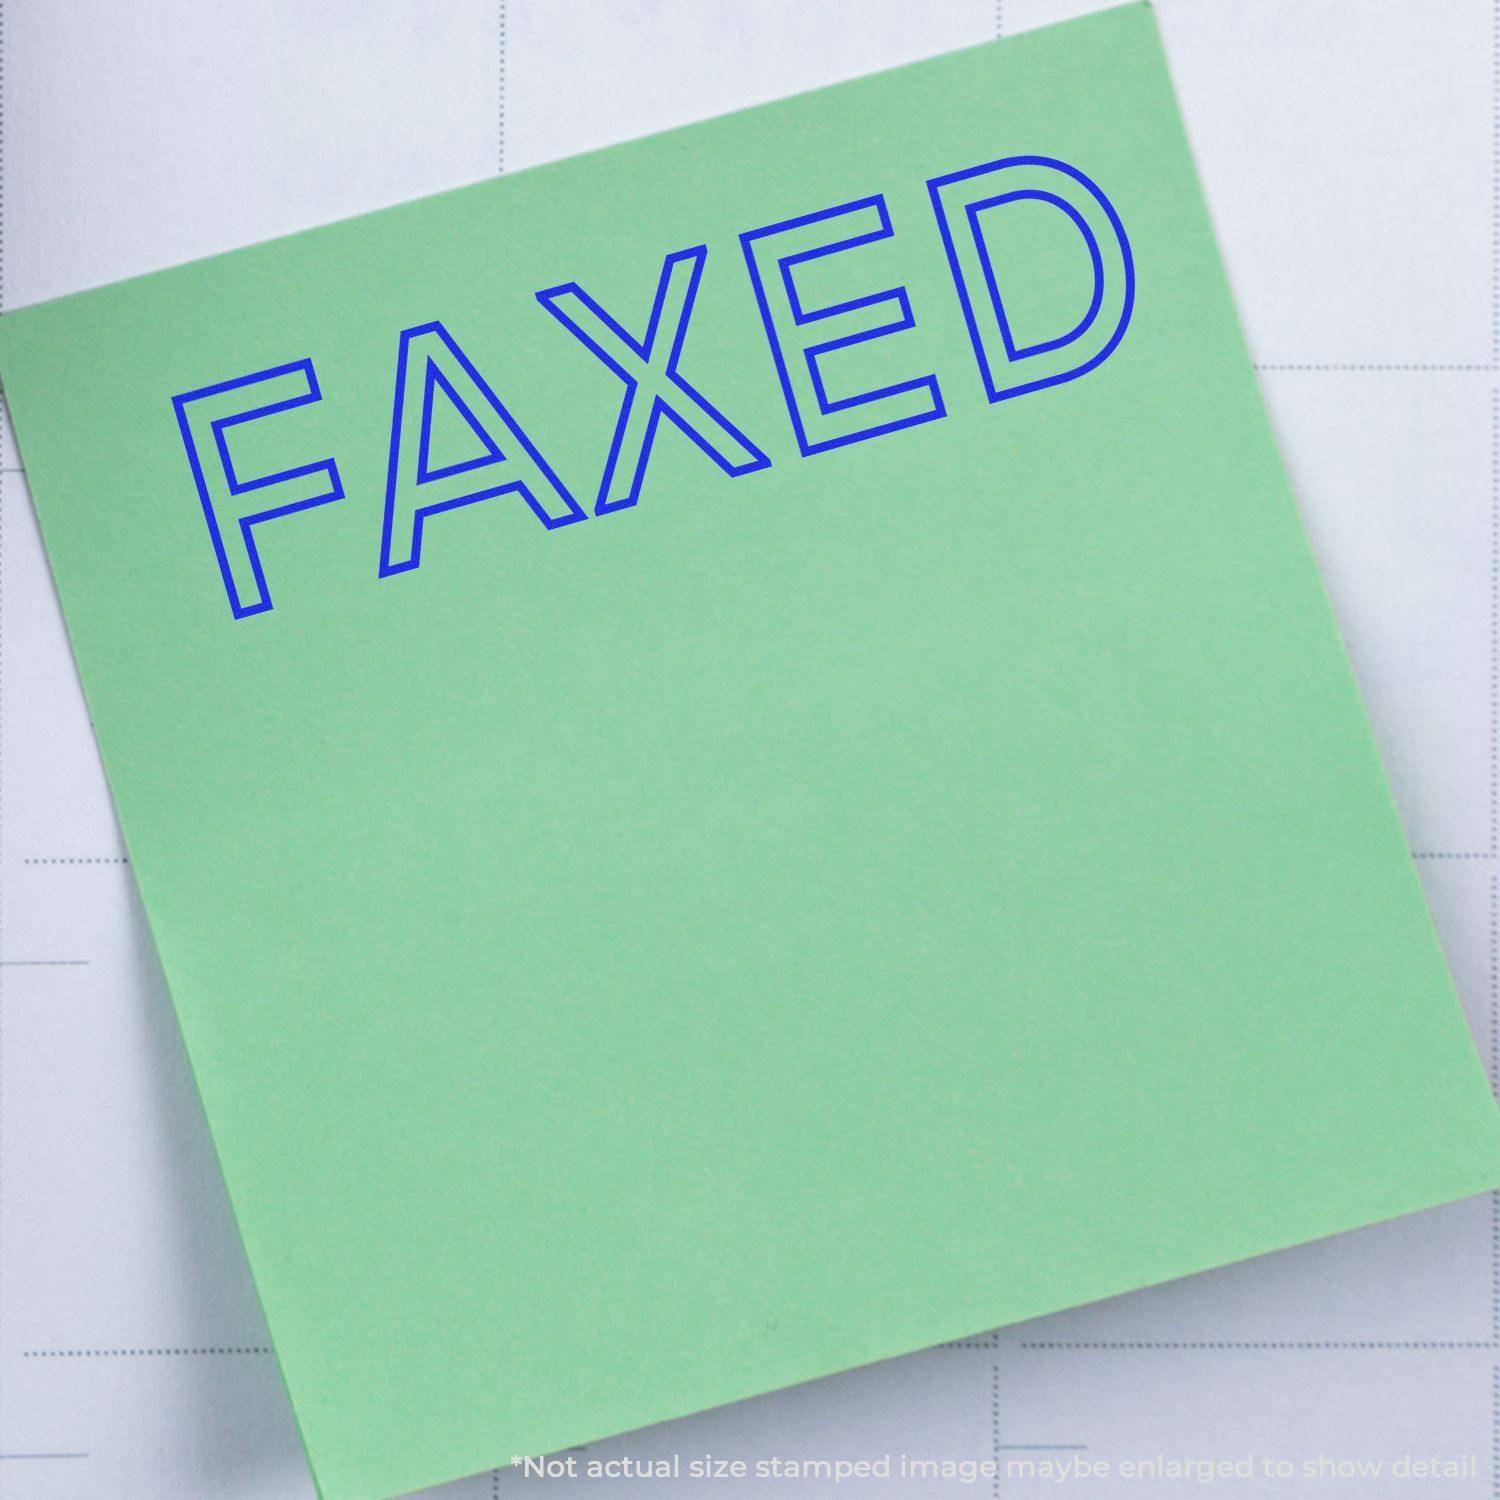 A self-inking stamp with a stamped image showing how the text "FAXED" in an outline style is displayed after stamping.